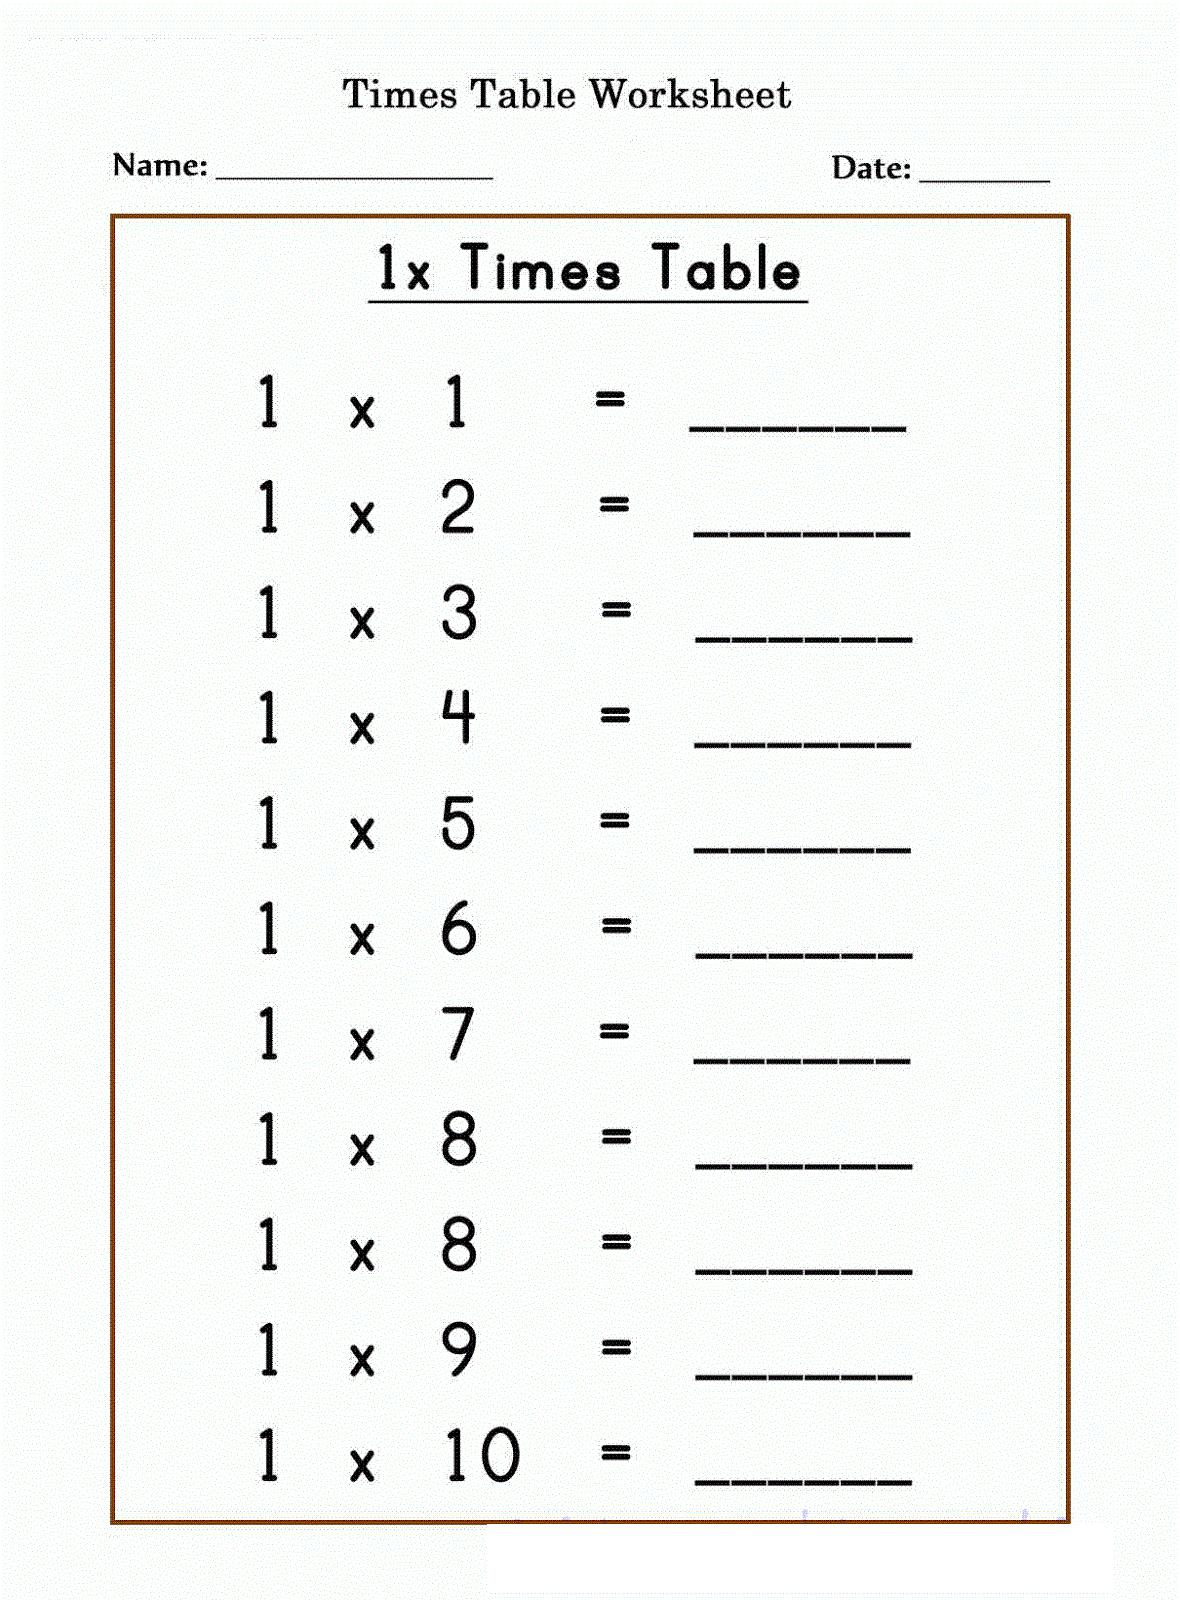 Times Tables Worksheets 1